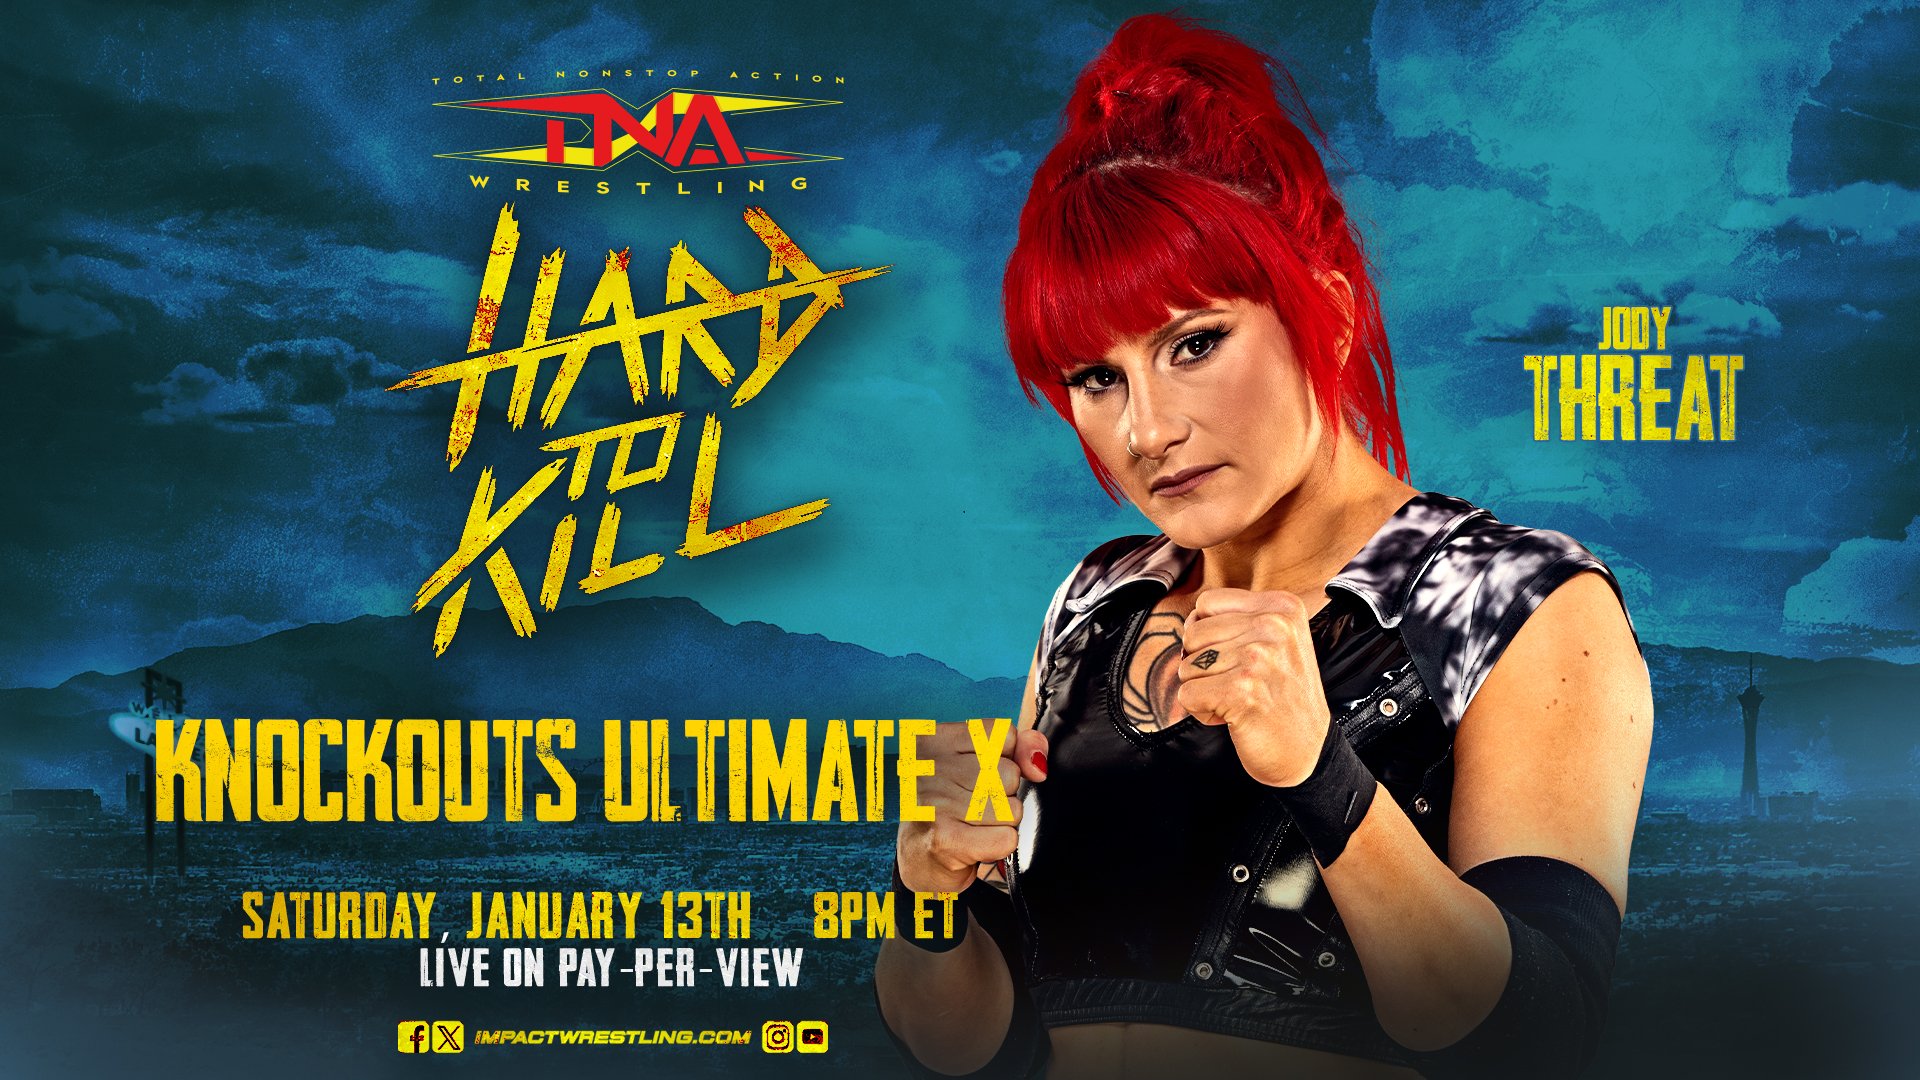 Jody Threat Announced for Knockouts Ultimate X